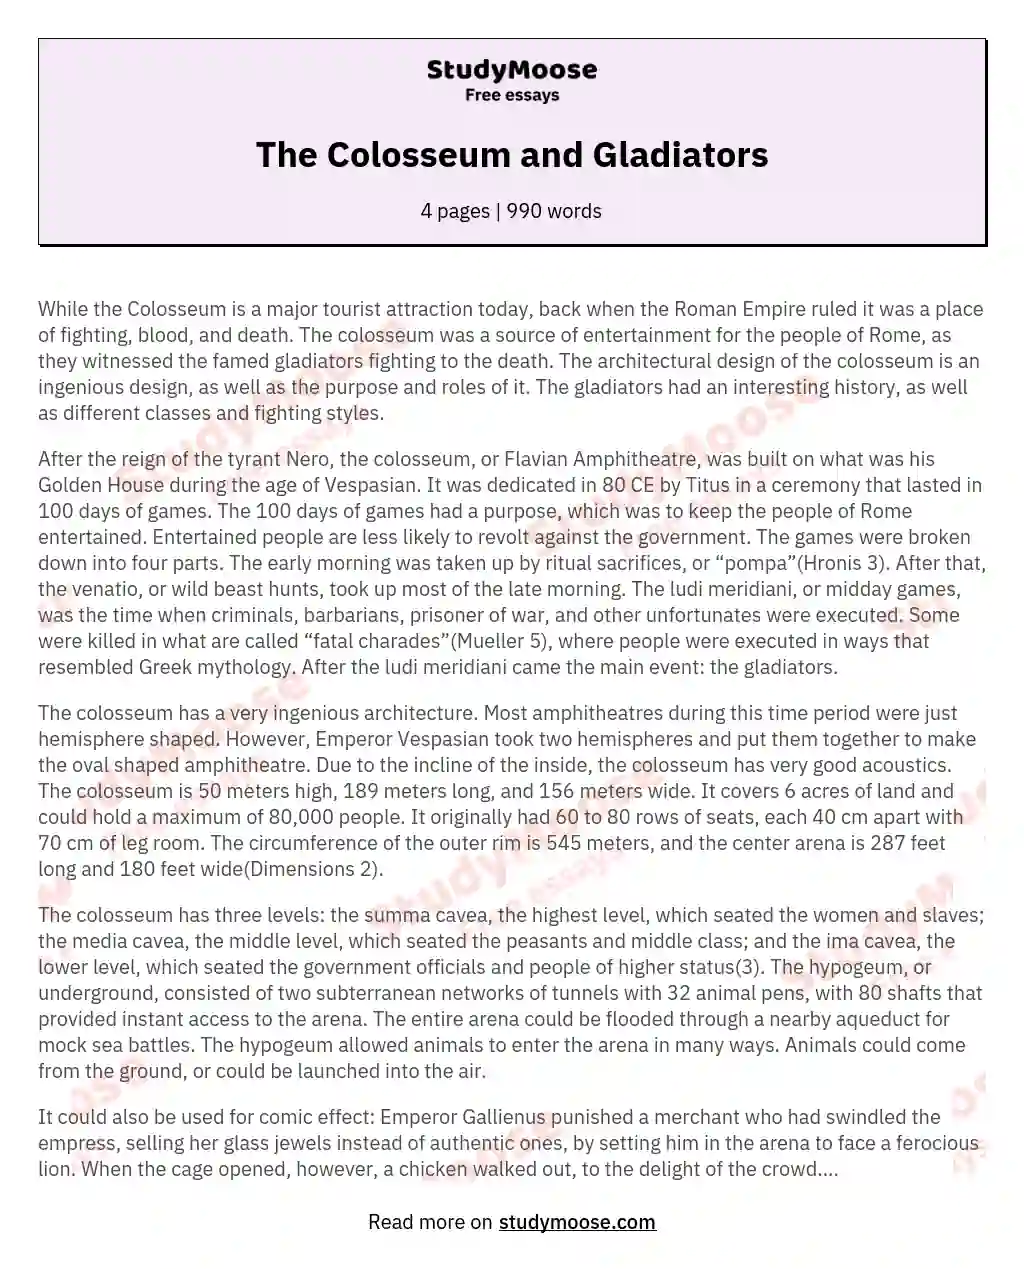 The Colosseum and Gladiators essay